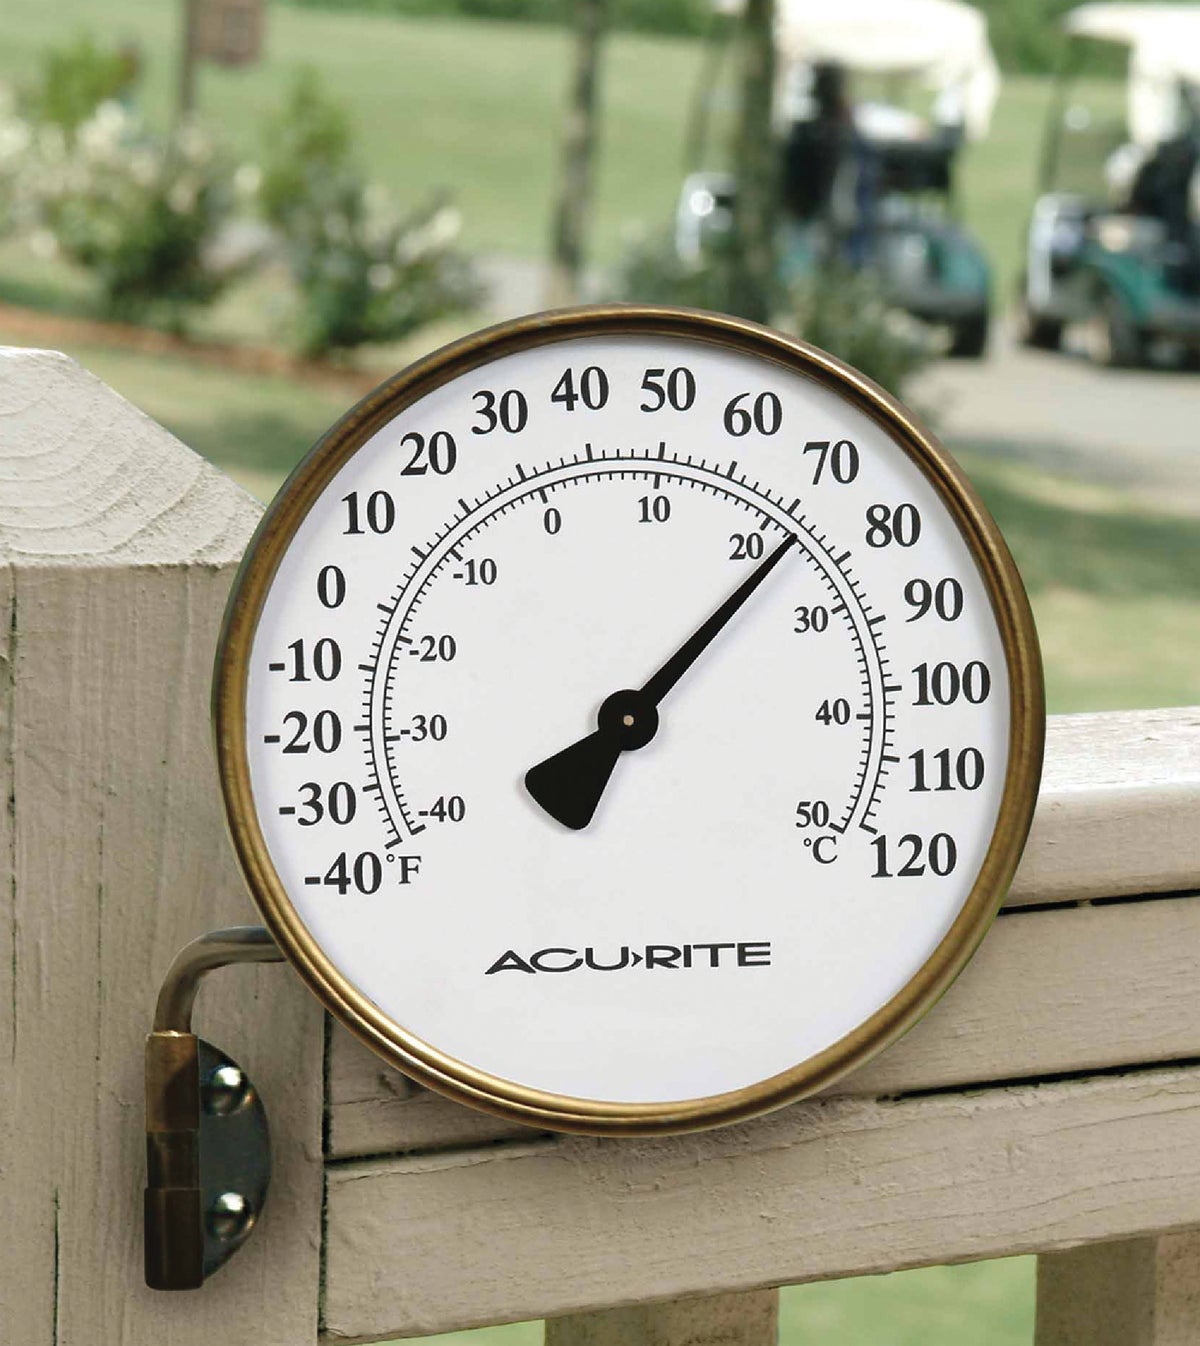 Taylor Precision Products Heritage 8.5 Dial Outdoor-thermometers, Copper